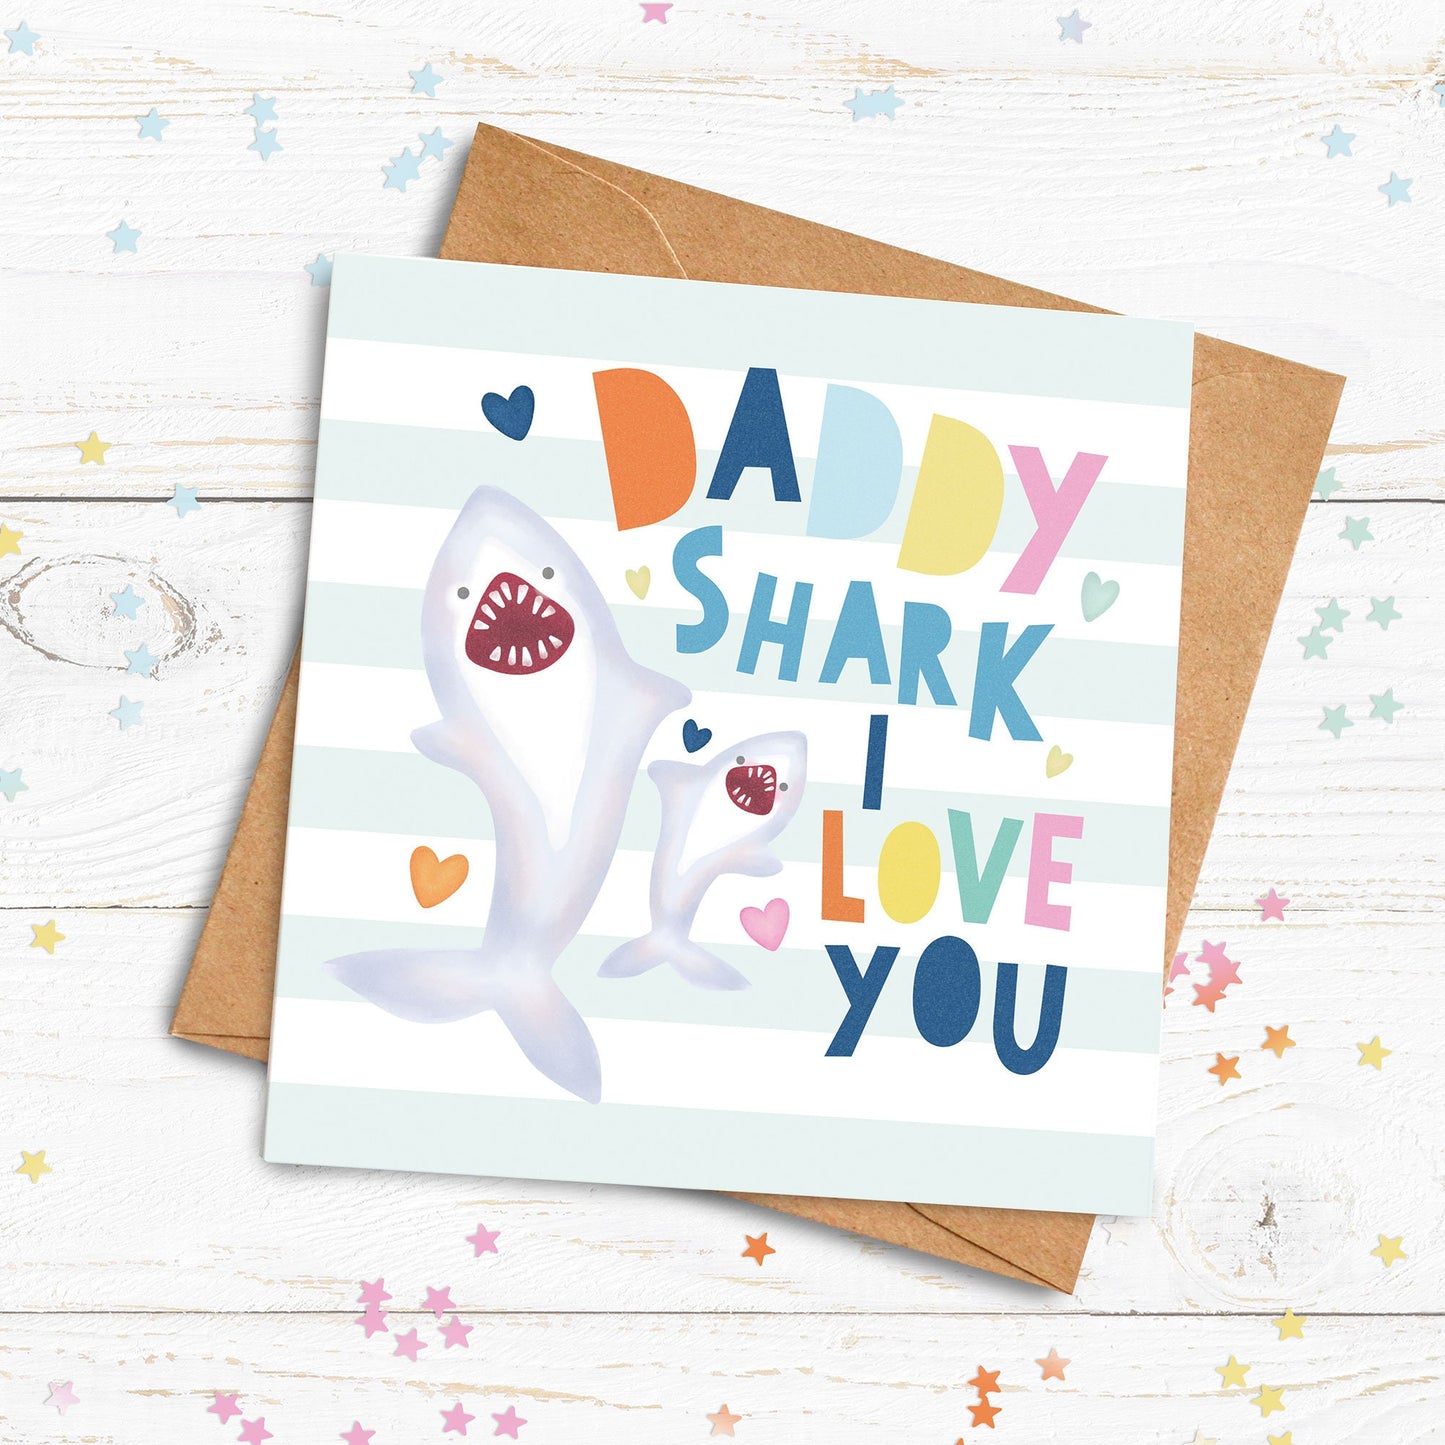 Daddy Shark We Love You/I love You. Father's Day Card. Happy Birthday Card. For him. Daddy Card. Direct Send Option.